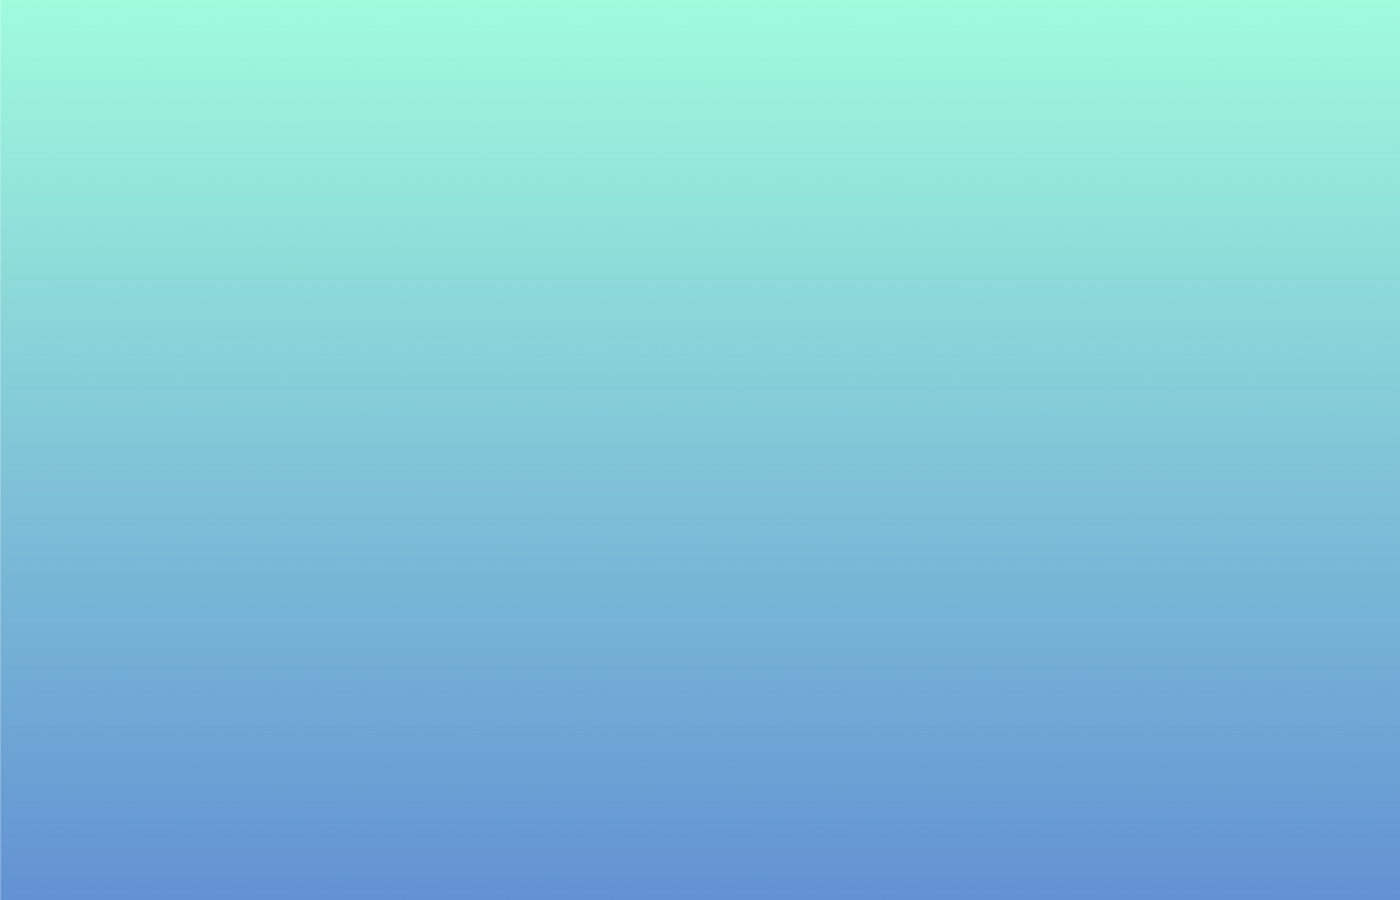 gradients in design example with linear gradient